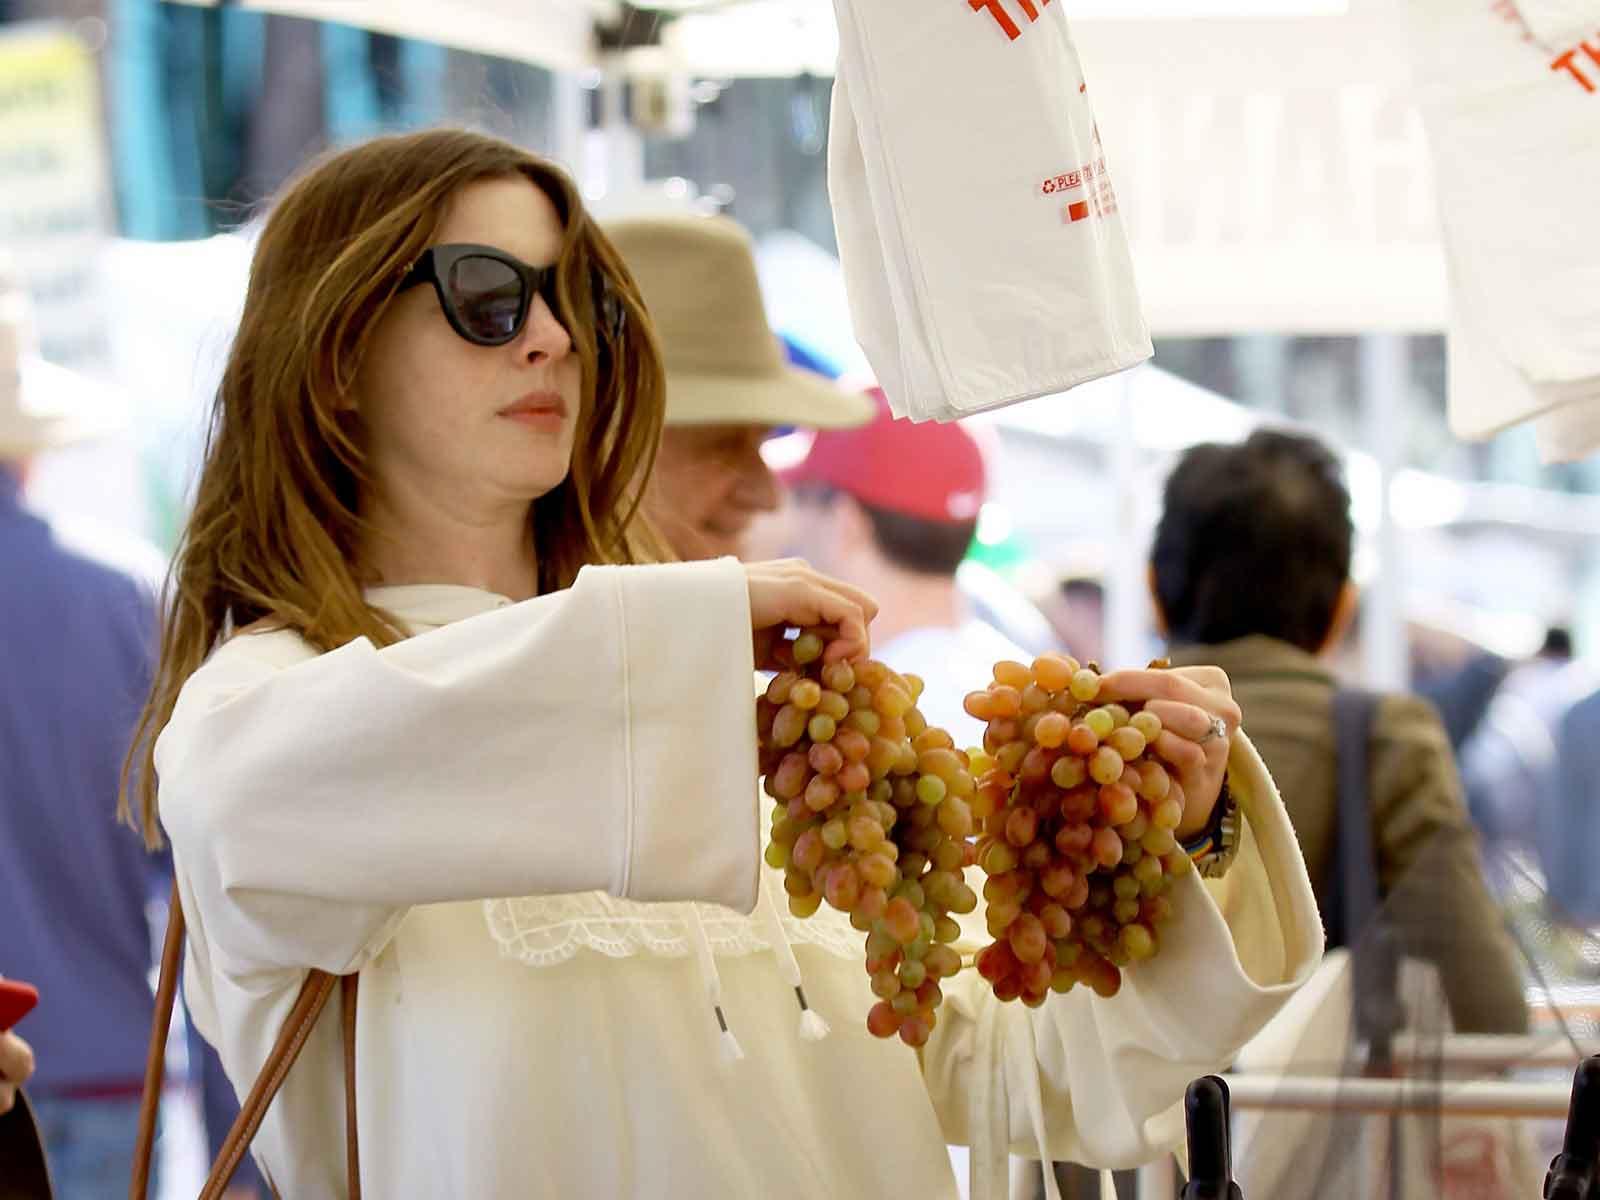 Anne Hathaway Shops for Organic Produce in the Most Anne Hatha-way Possible